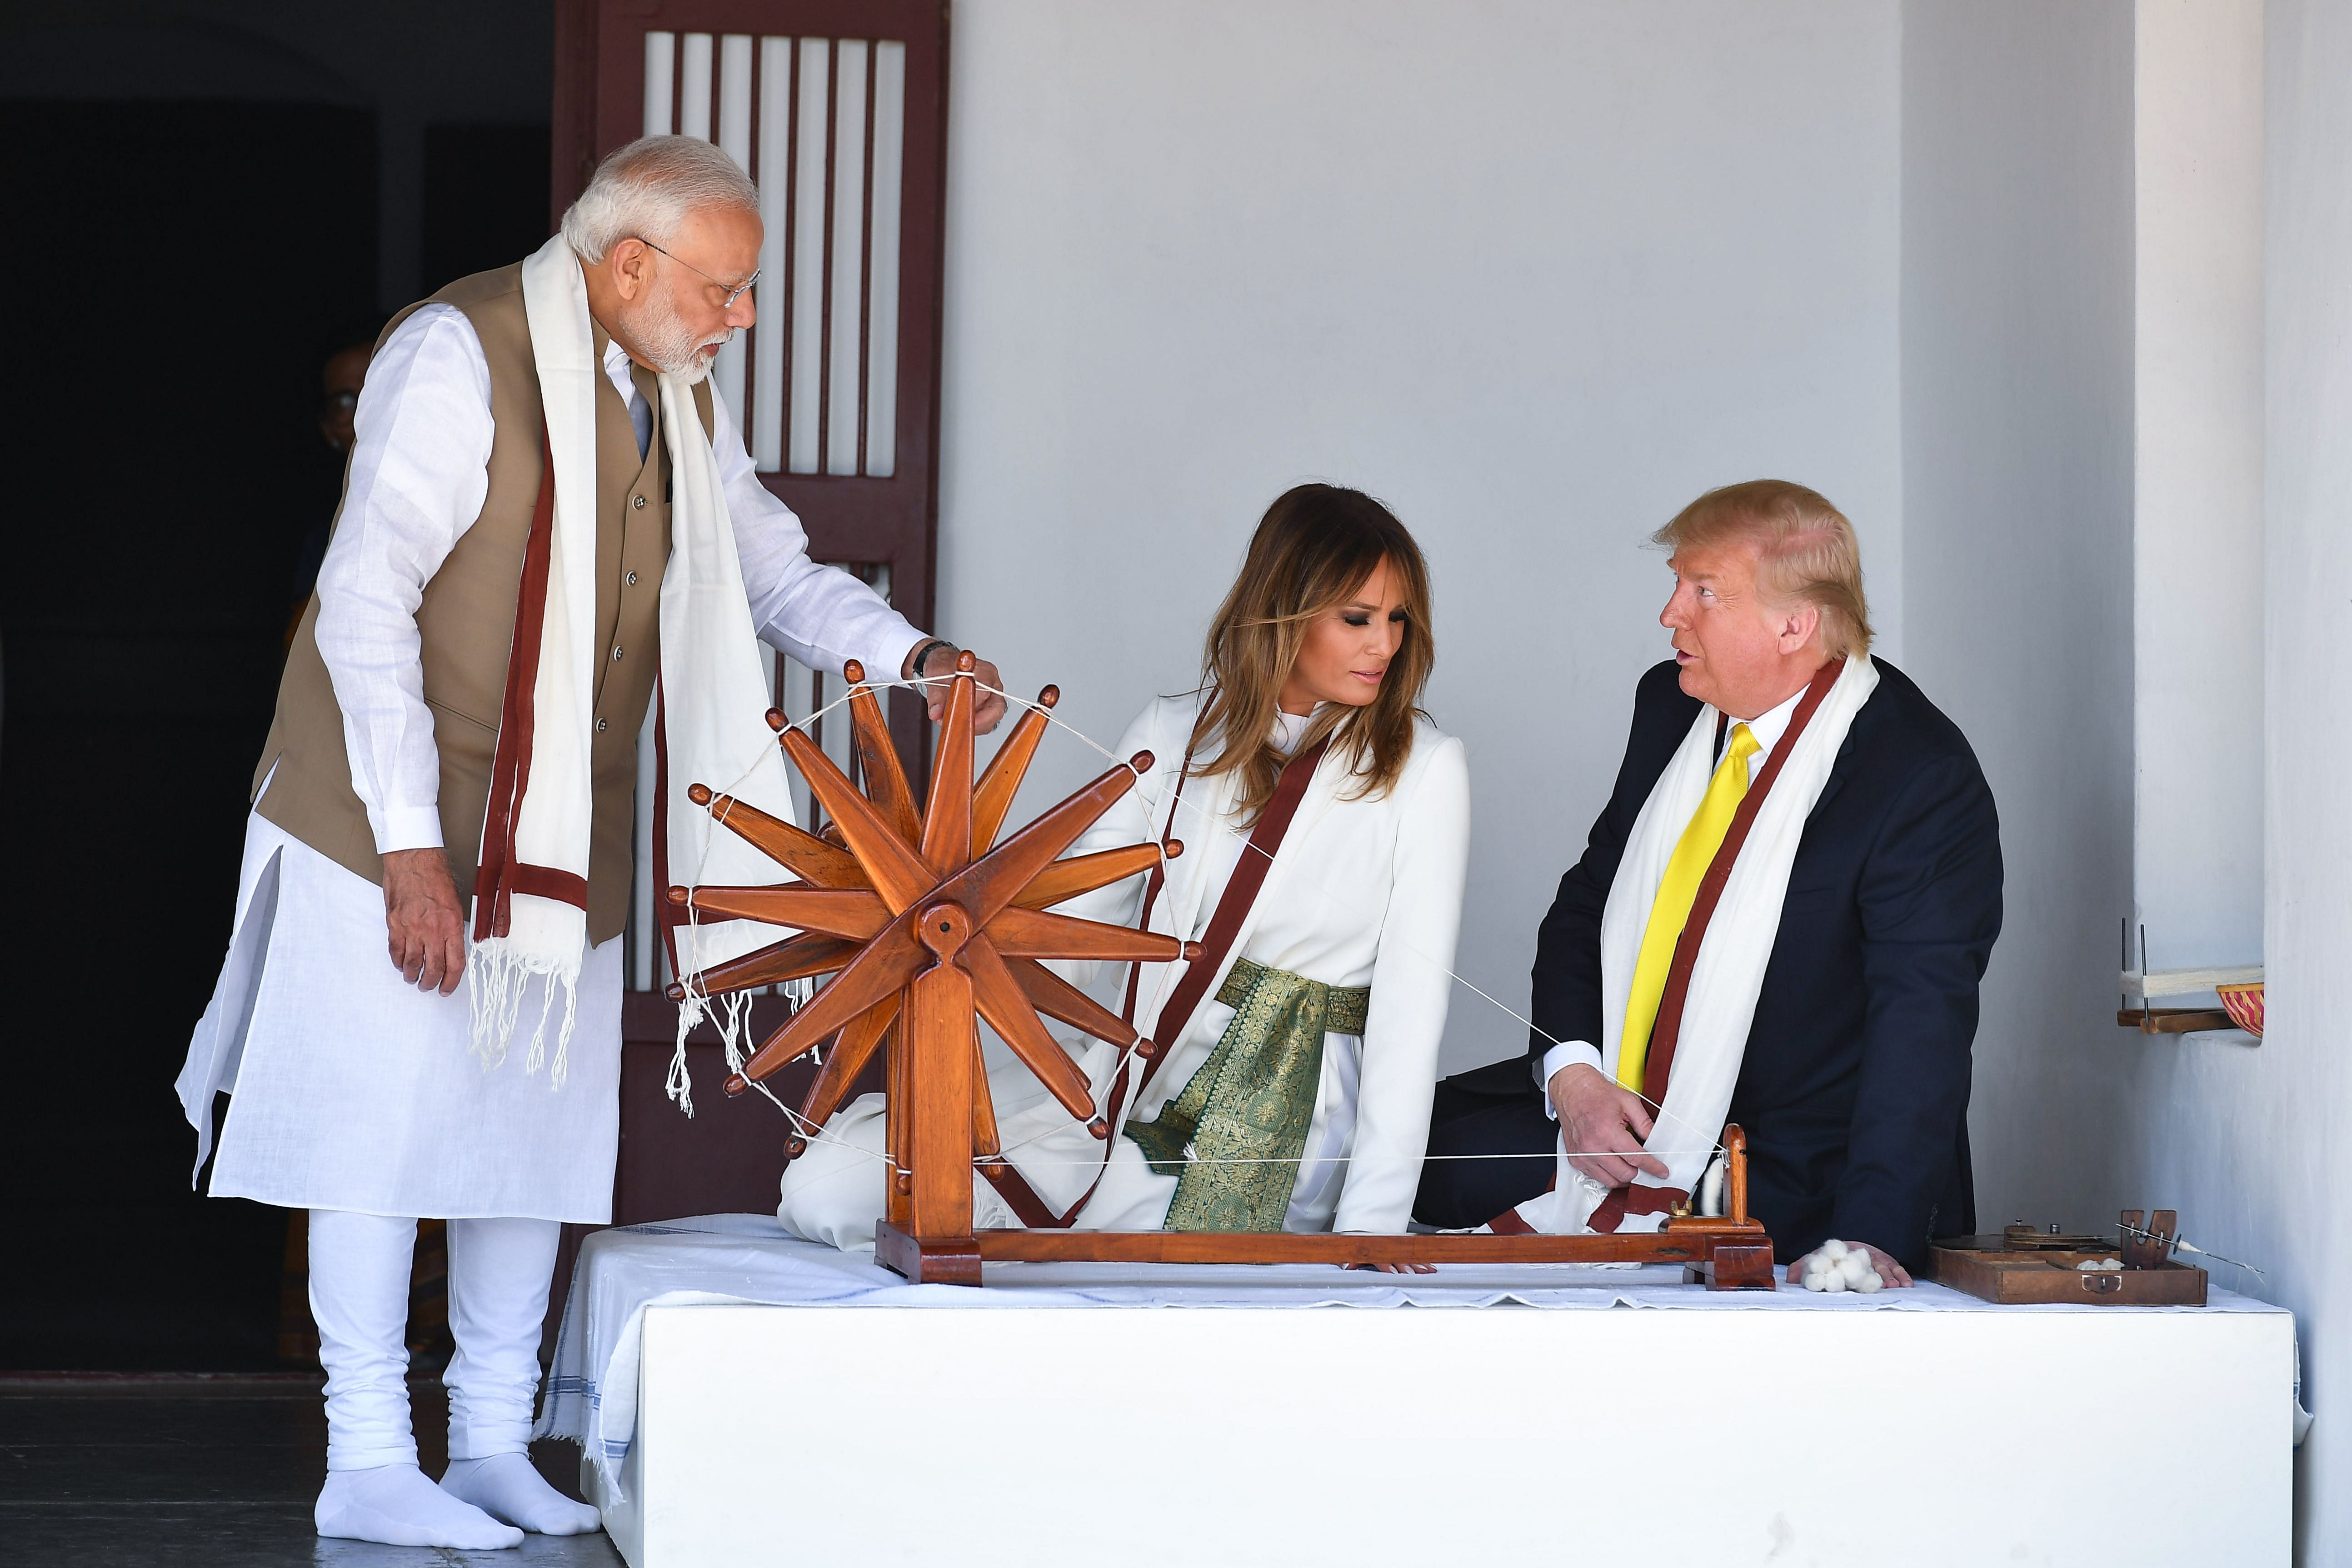 "To my great friend Prime Minister Naredra Modi, thank you for this wonderful visit," Trump wrote in the Ashram visitors' book. (Credit: AFP Photo)